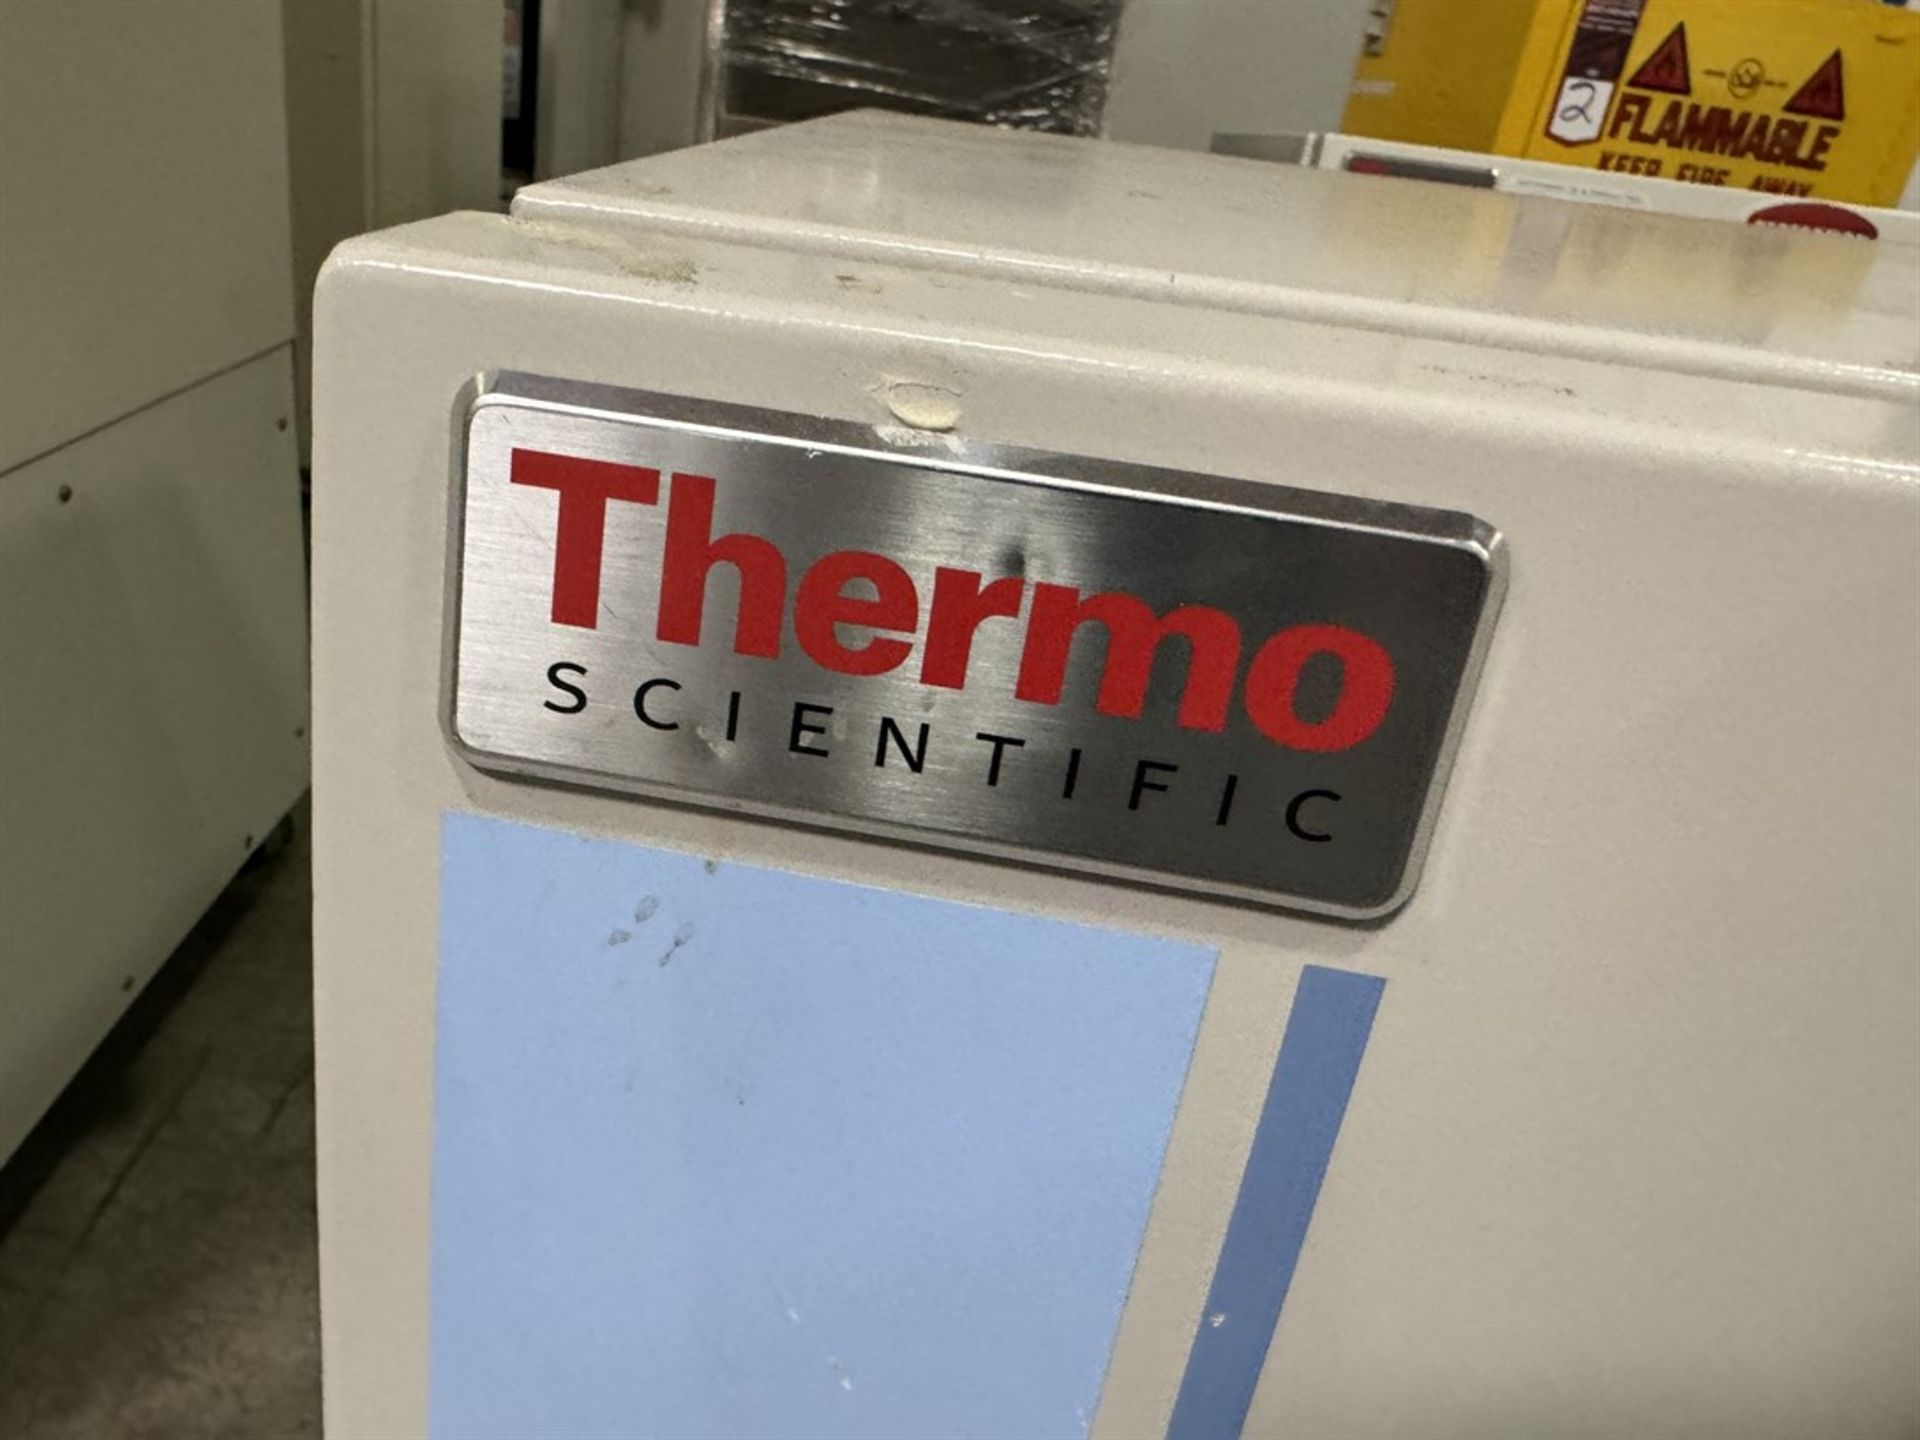 THERMO SCIENTIFIC 7454 Cryomed Controlled Rate Freezer, s/n 300028624 - Image 3 of 5